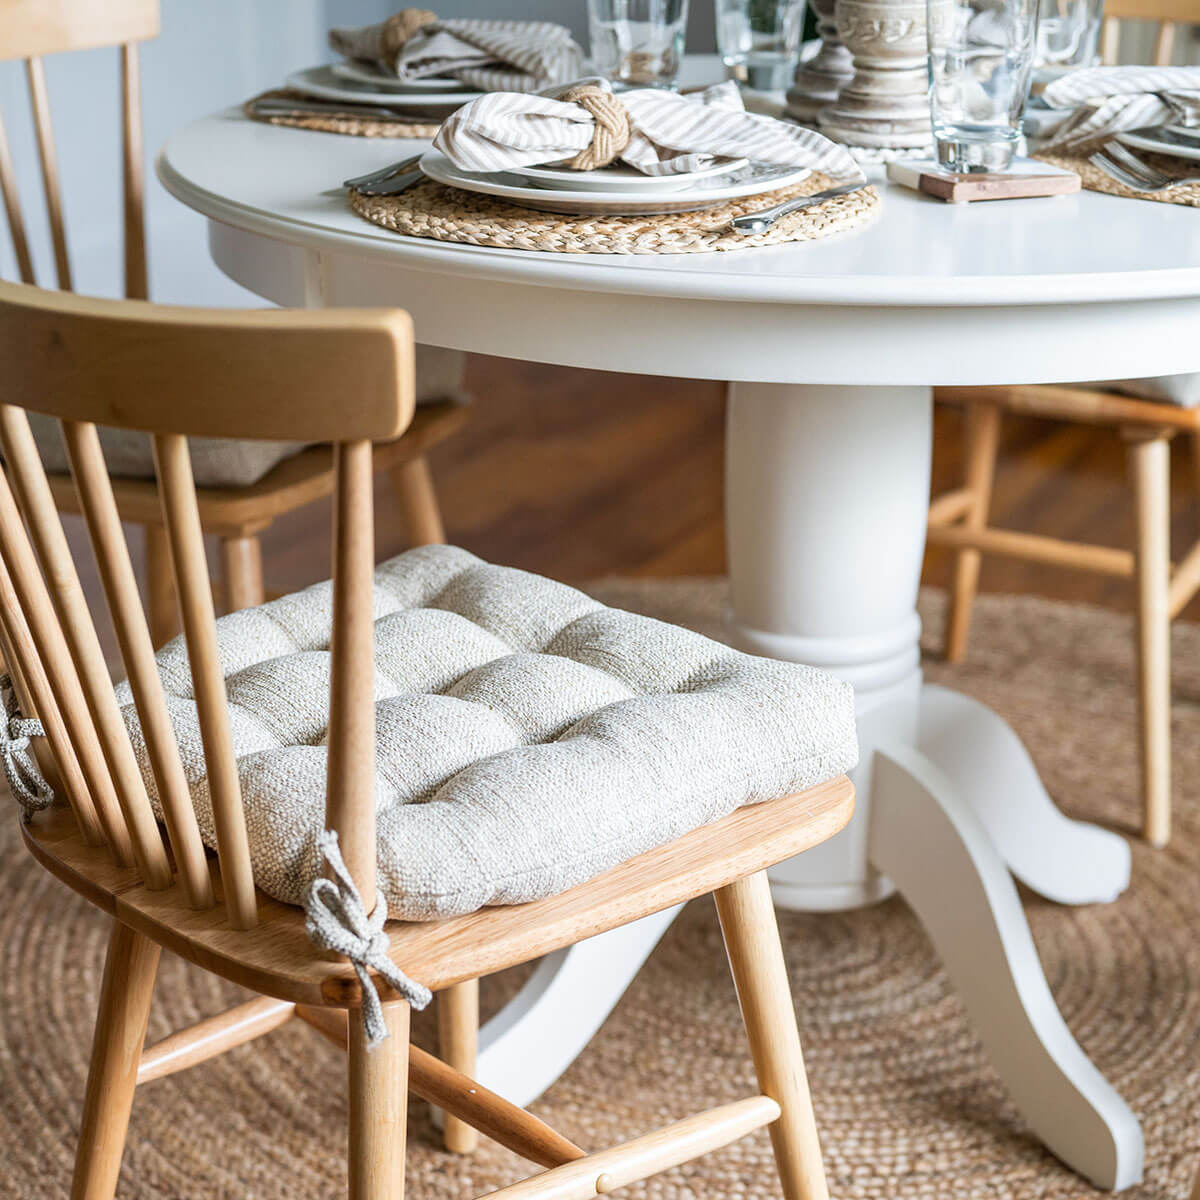 natural dining chair cushions in neutral colored dining room design with sisal rug and woven placemats